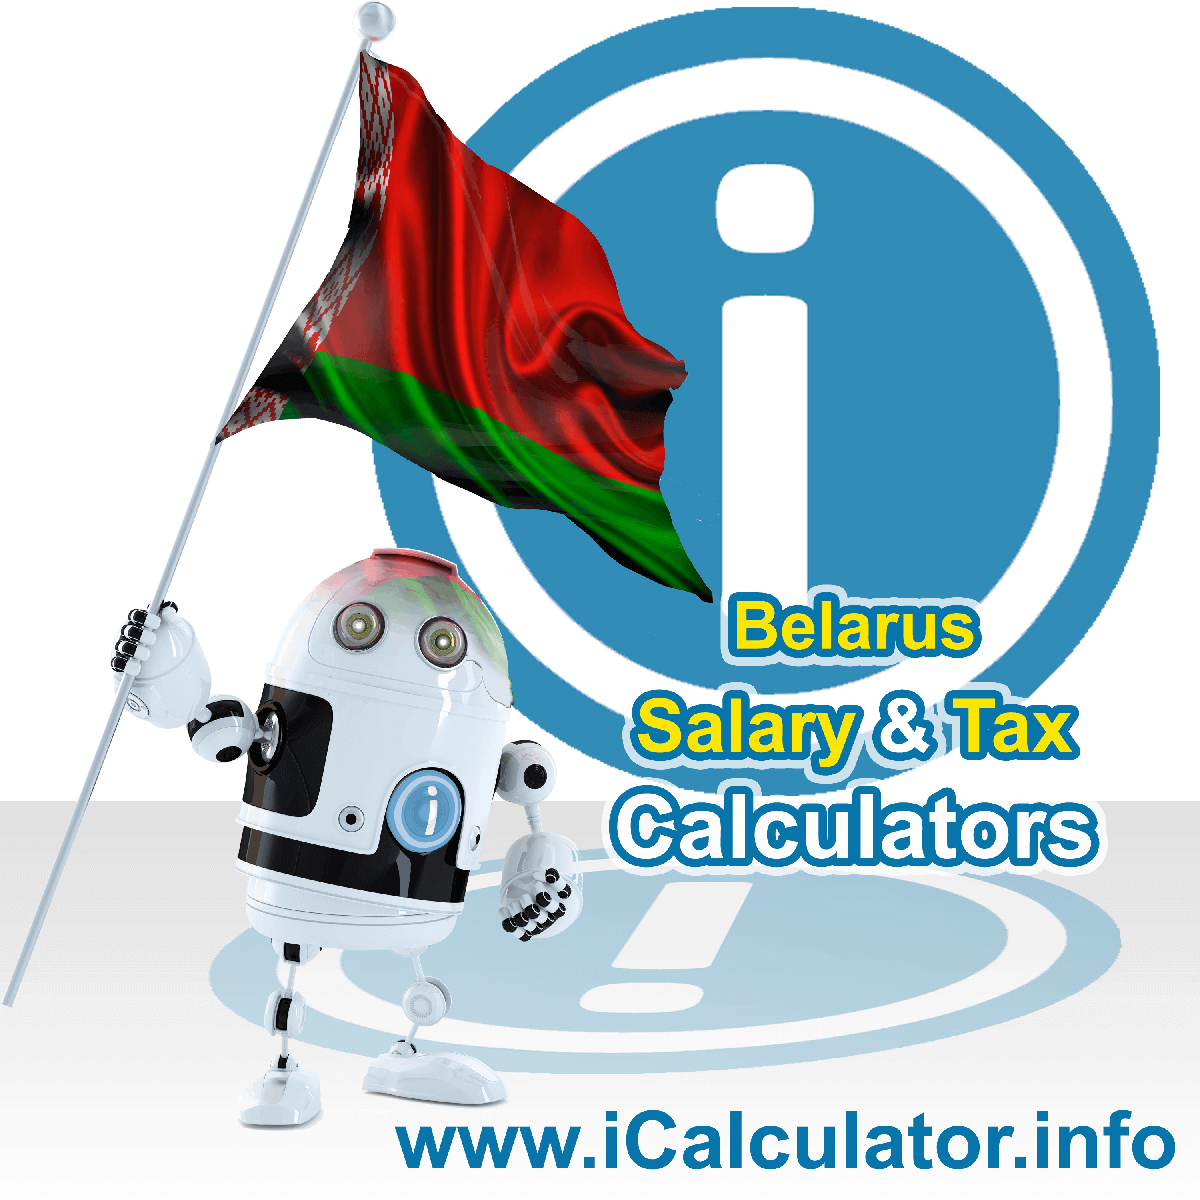 Belarus Tax Calculator. This image shows the Belarus flag and information relating to the tax formula for the Belarus Salary Calculator